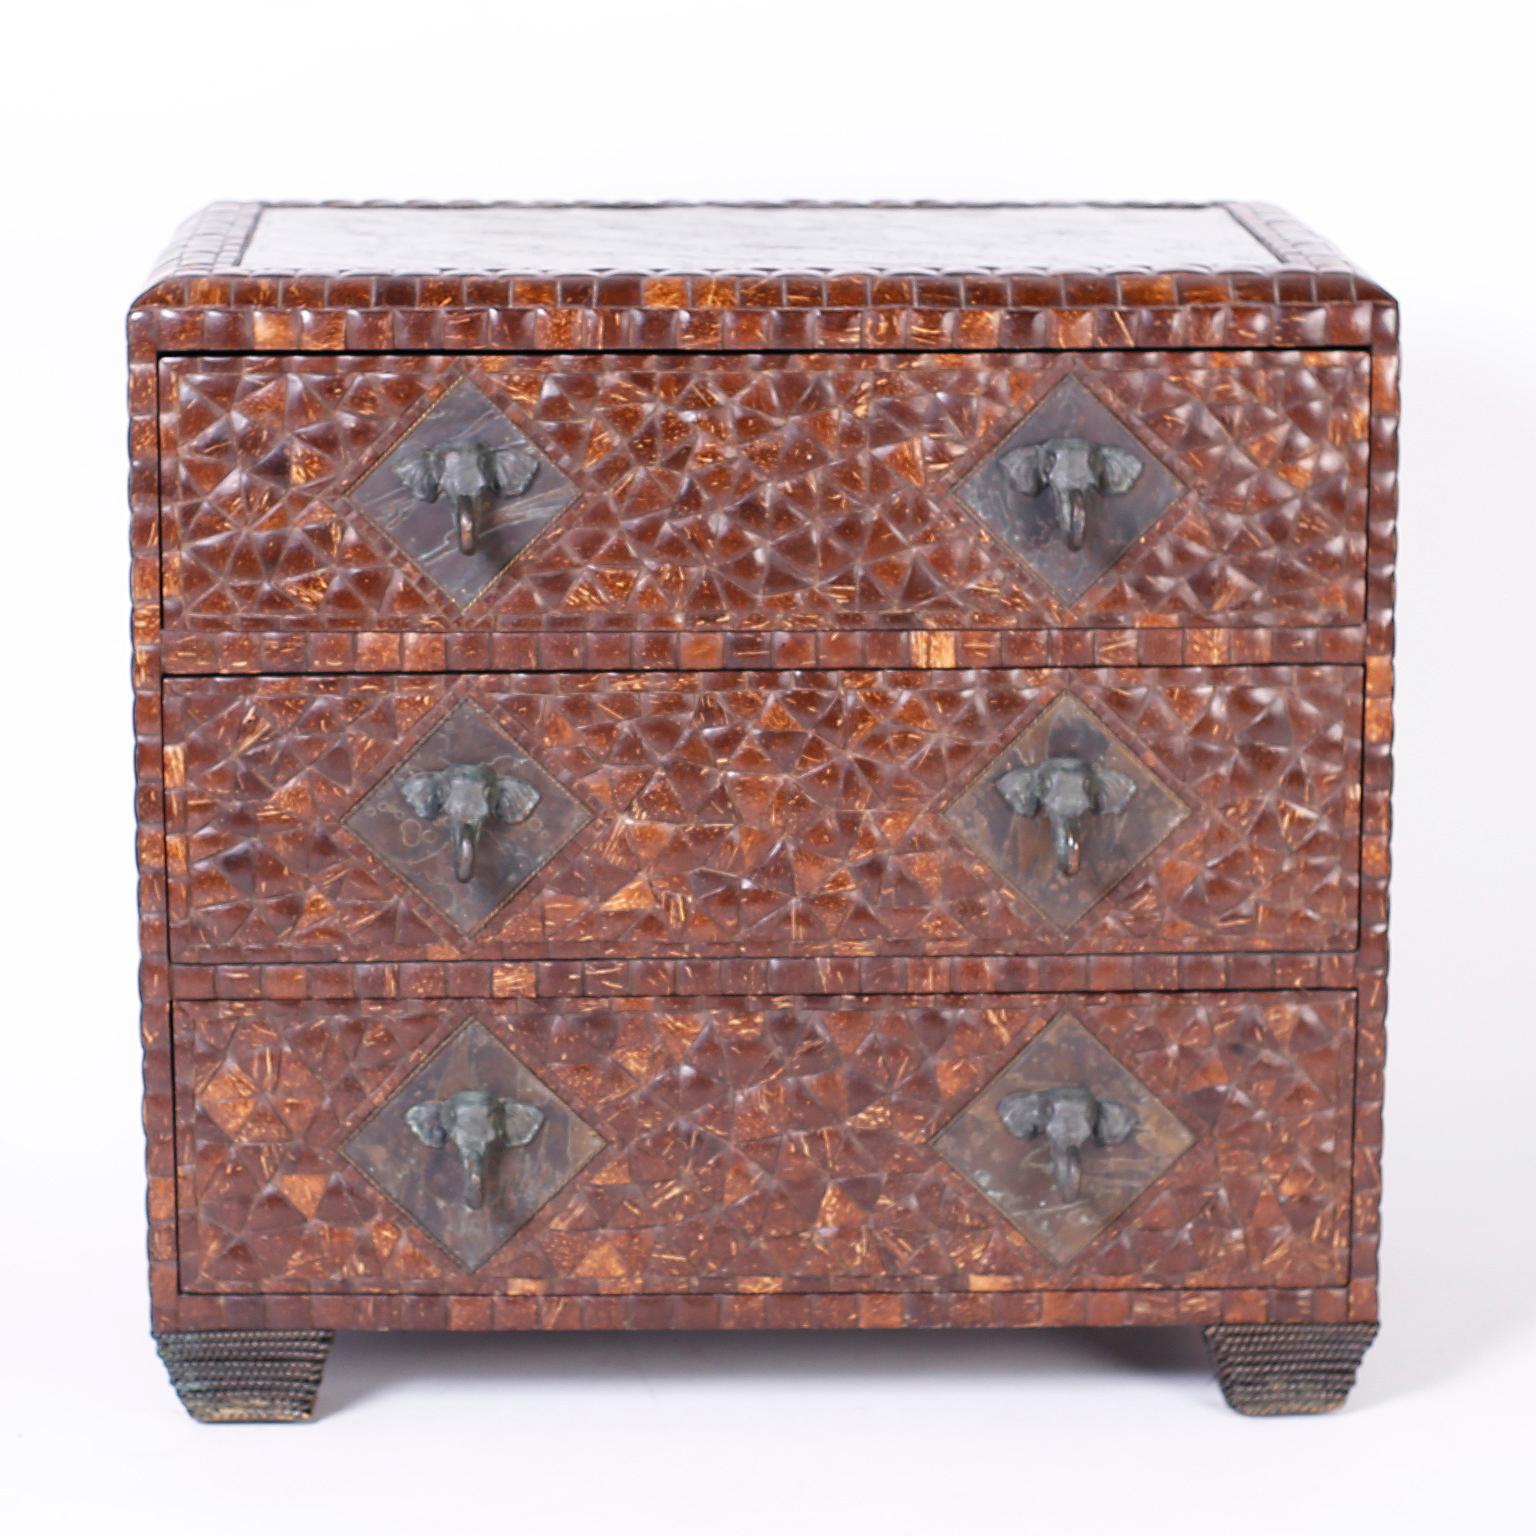 Three drawer chest clad in polished coconut shells featuring bronze panels on the top and sides with embossed biometric designs and bronze elephant head hardware. Signed Maitland-Smith in a drawer.